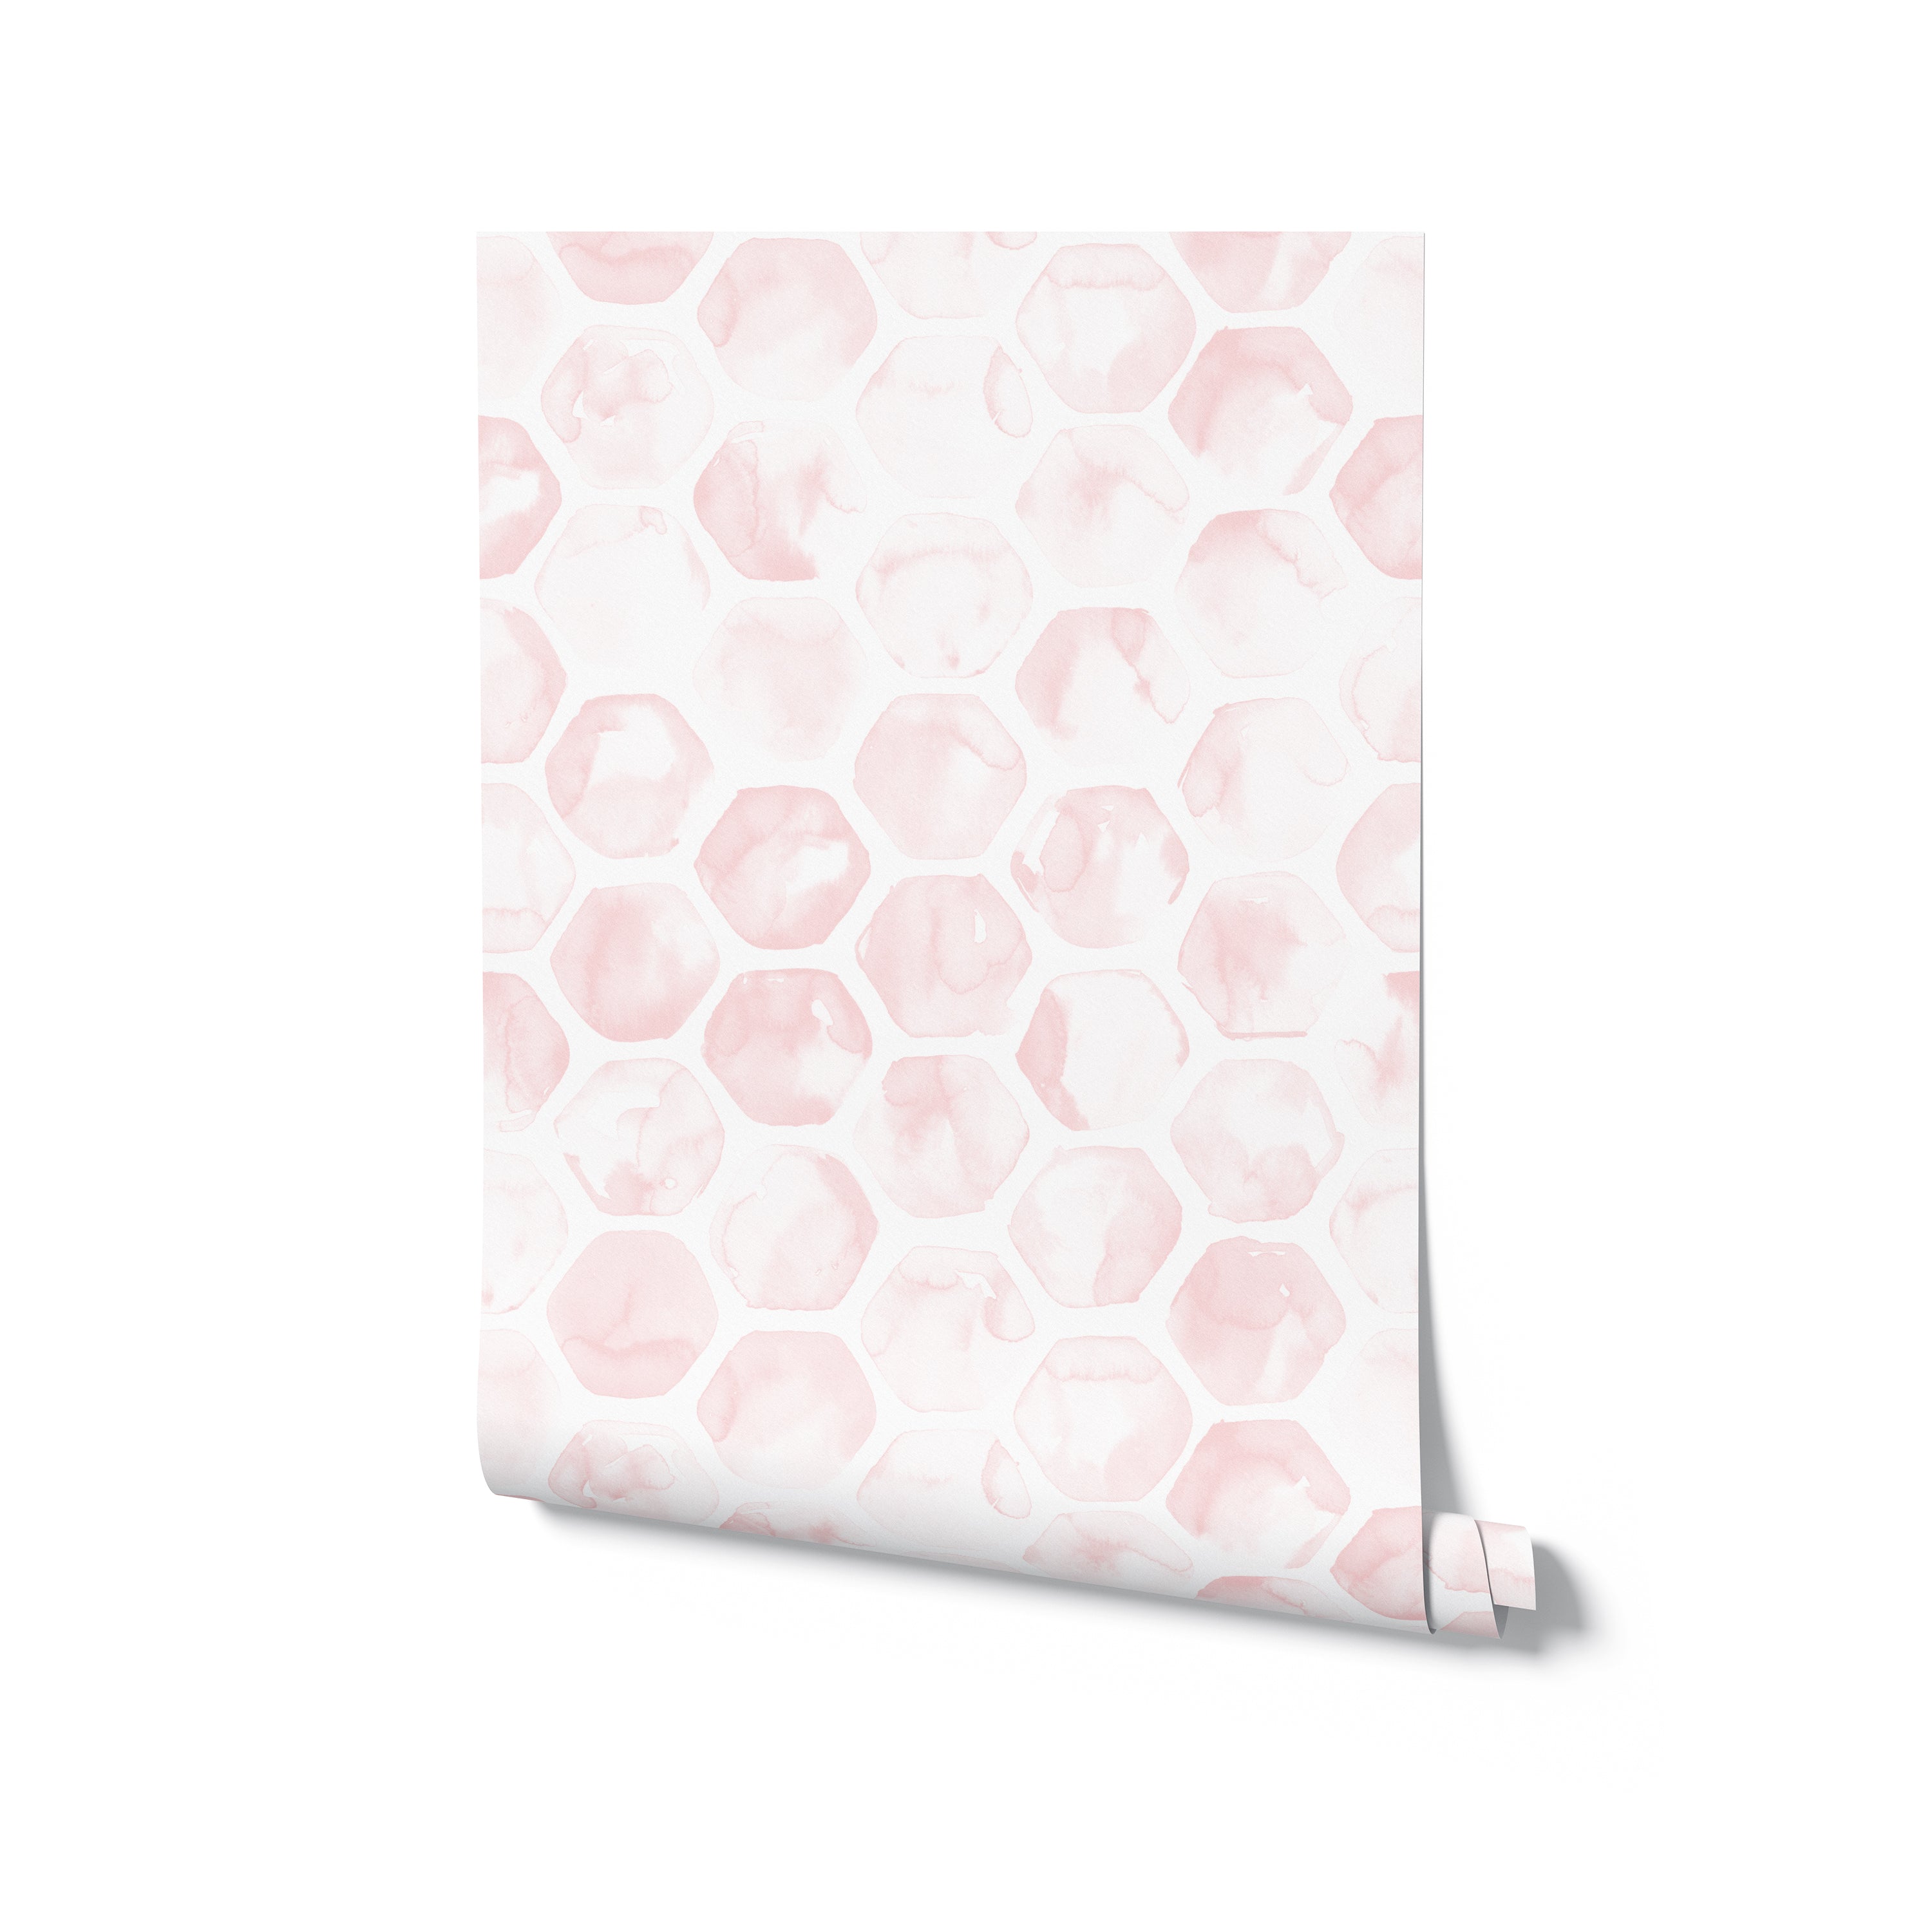 "A roll of Watercolour Honeycomb Wallpaper with the design visible on the partially unrolled end, illustrating the pattern's variation in watercolor intensity and shape irregularity, against a pure white background."